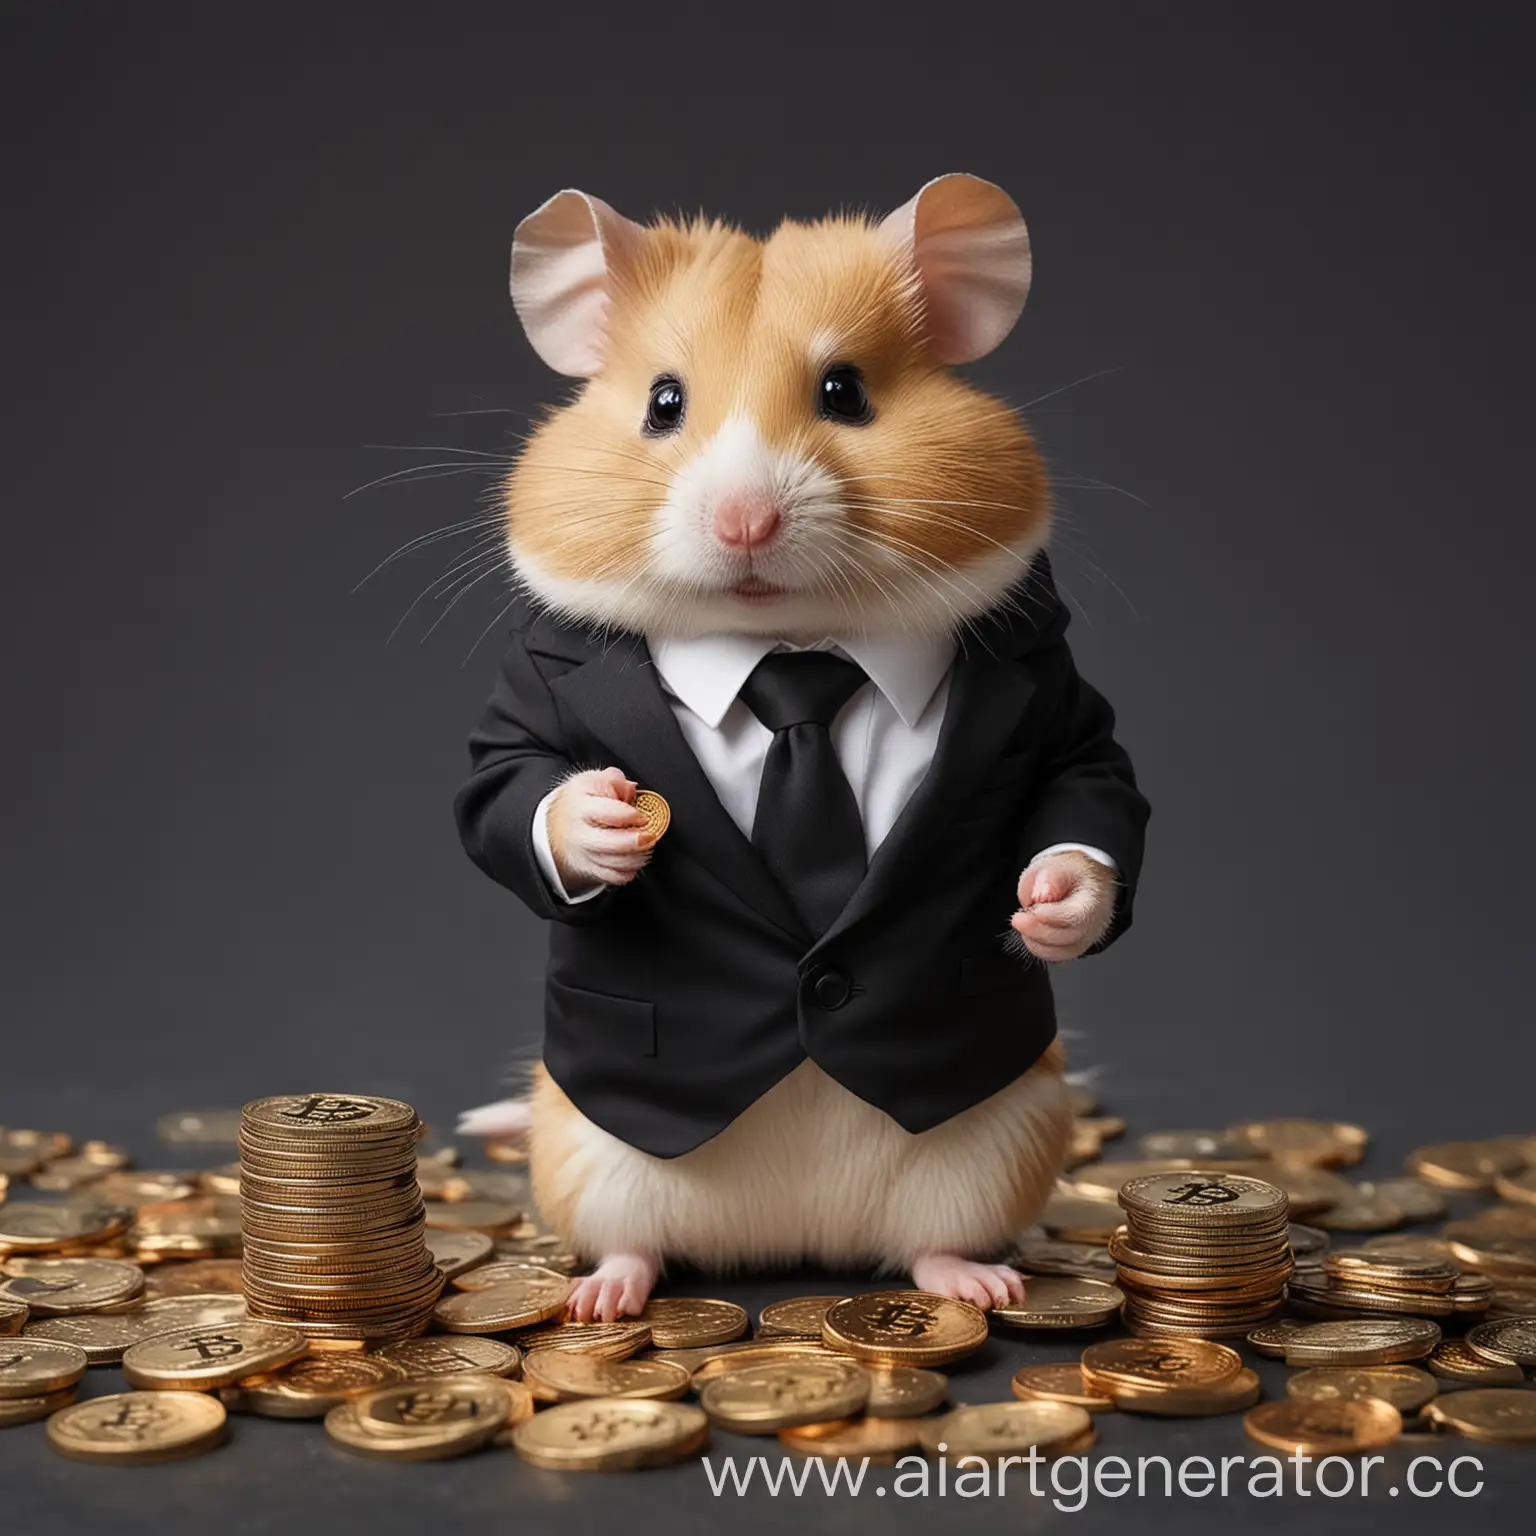 Hamster-in-Black-Suit-Jacket-and-Necktie-with-Bitcoin-Coins